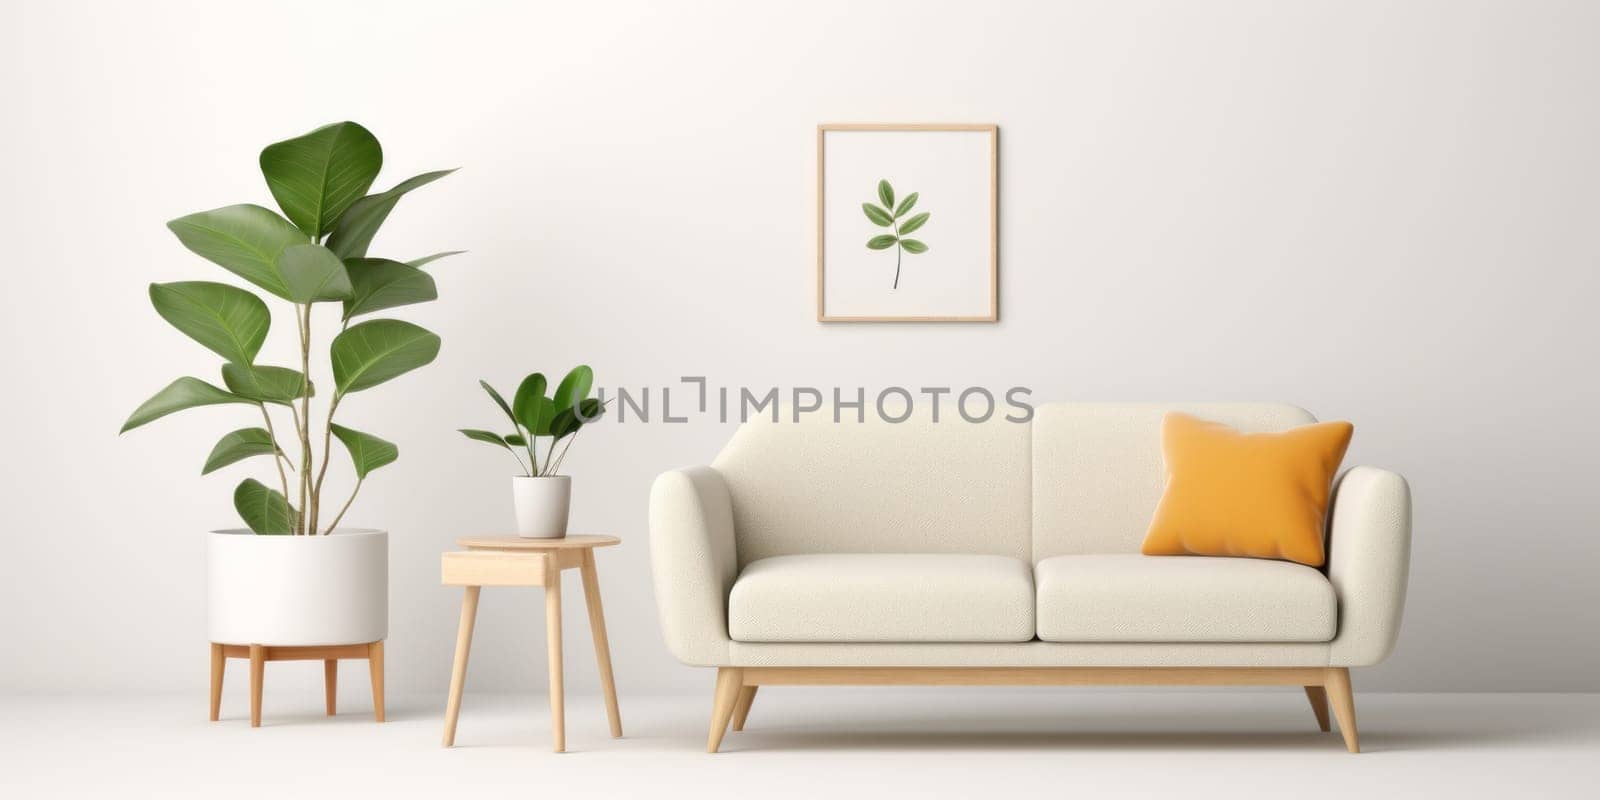 A white couch sitting next to a plant in a living room, AI by starush